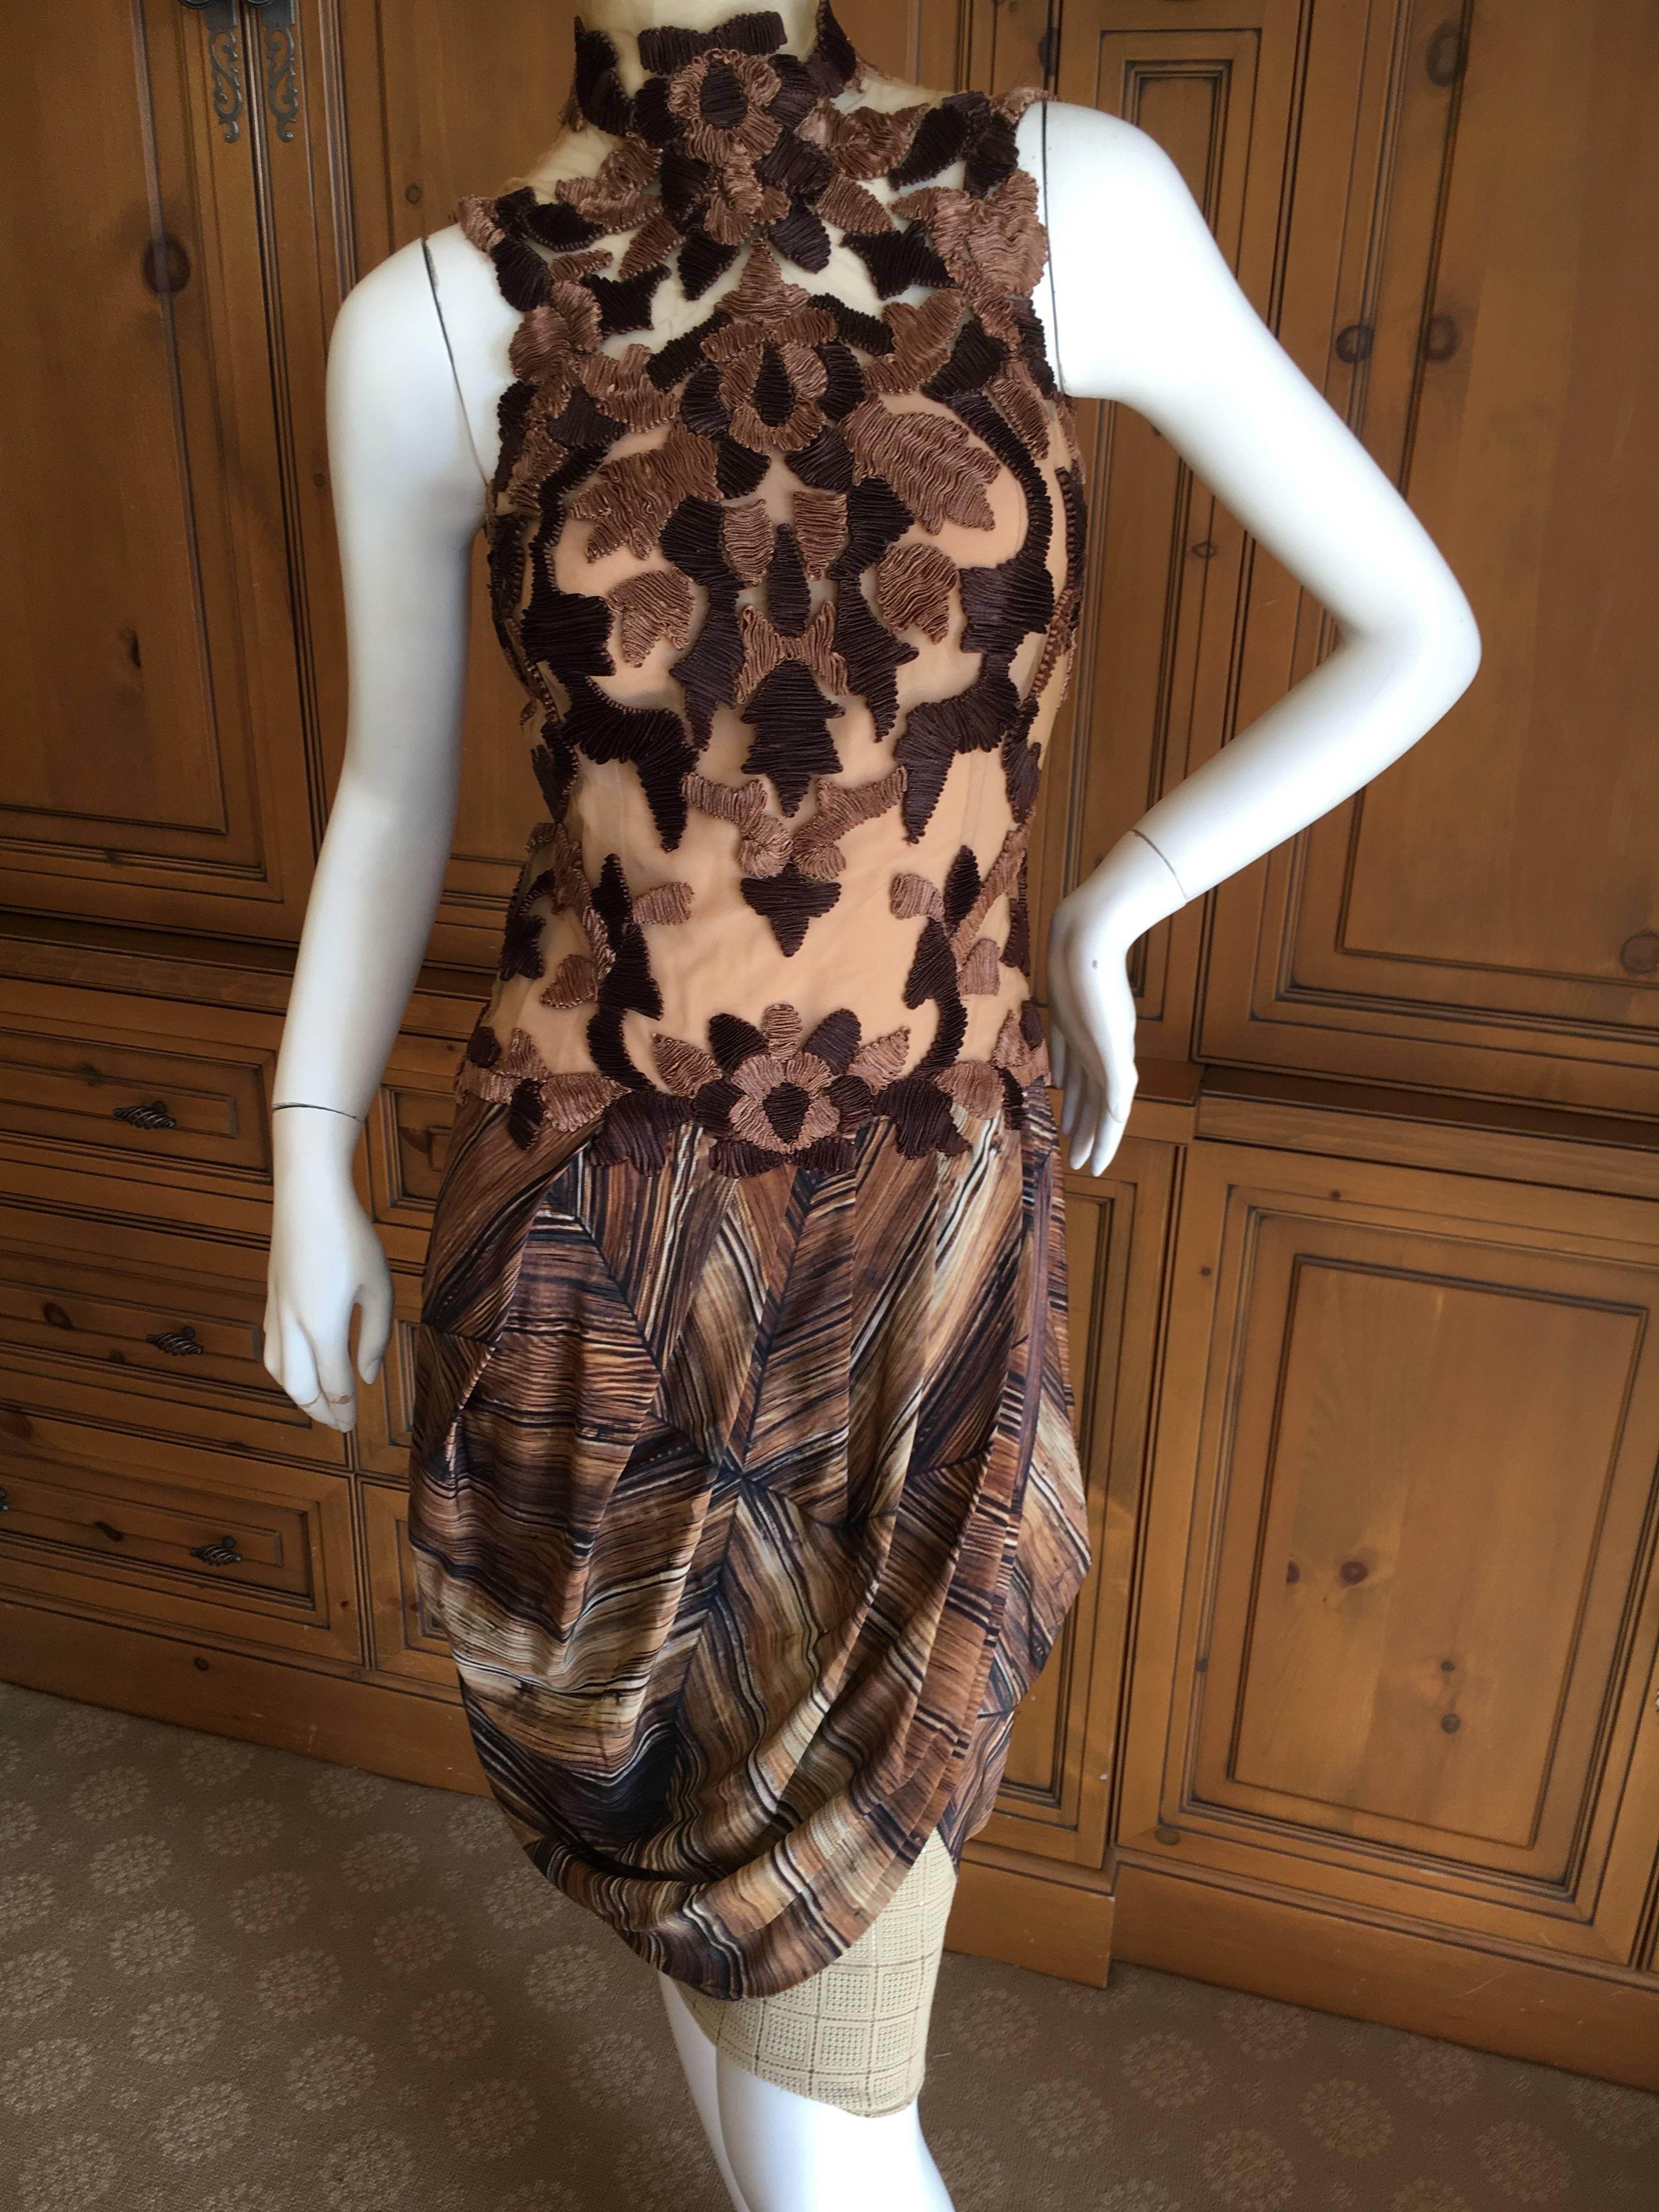 Rodarte Sleeveless Wood Grain Dress with Applique Top Spring 2011.
Size label no longer on, I would estimate it size 0-2
Bust 34"
Waist 25"
Hips 38"
Length 39"
Excellent conditon